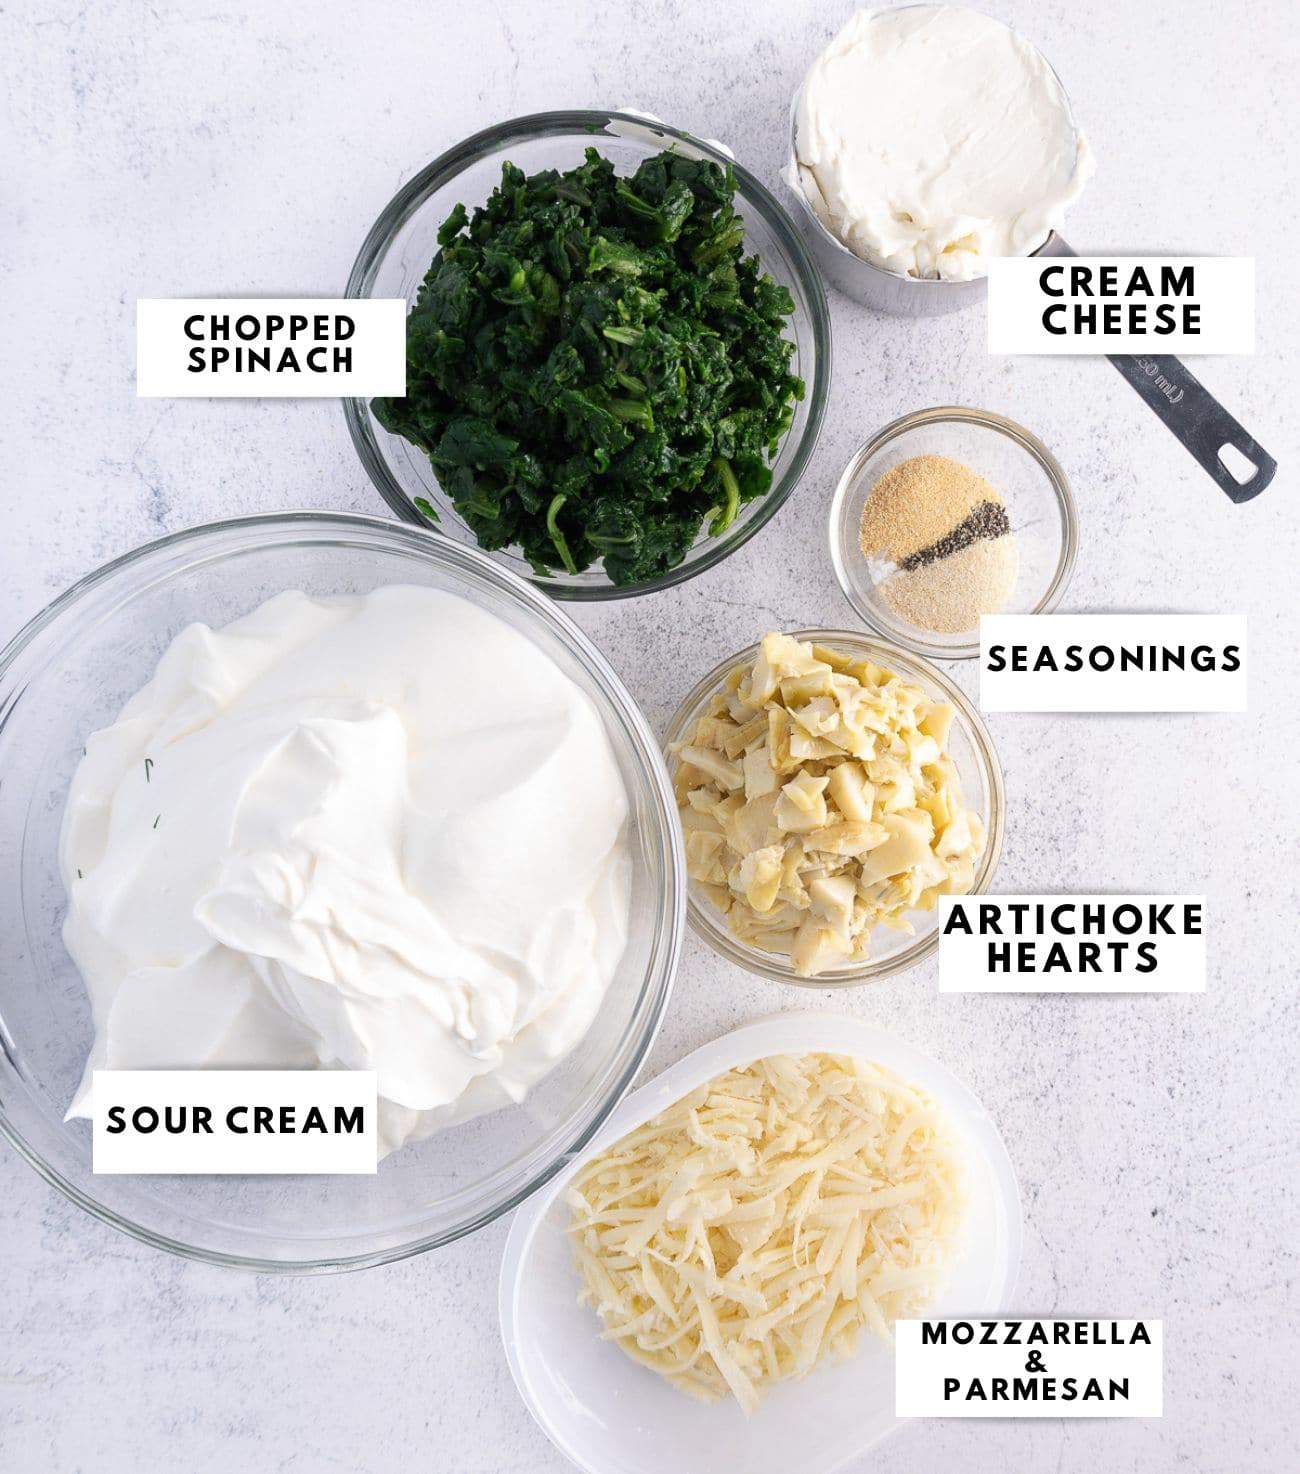 Ingredients to prepare mayo free spinach artichoke dip labelled